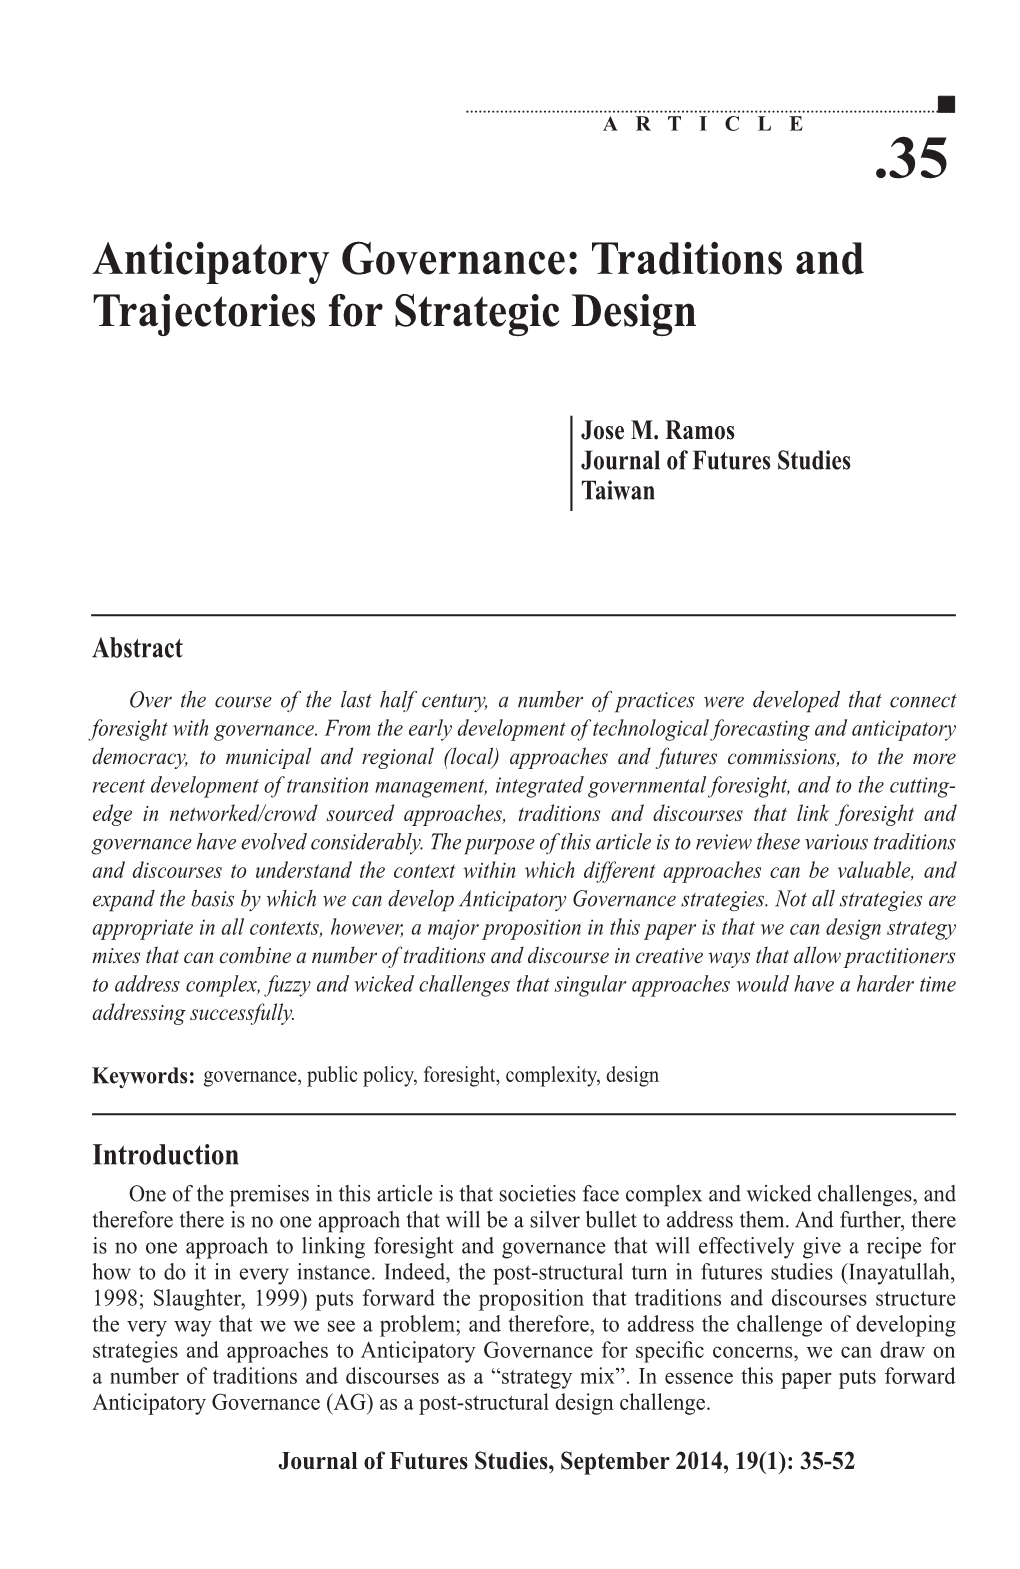 Anticipatory Governance: Traditions and Trajectories for Strategic Design